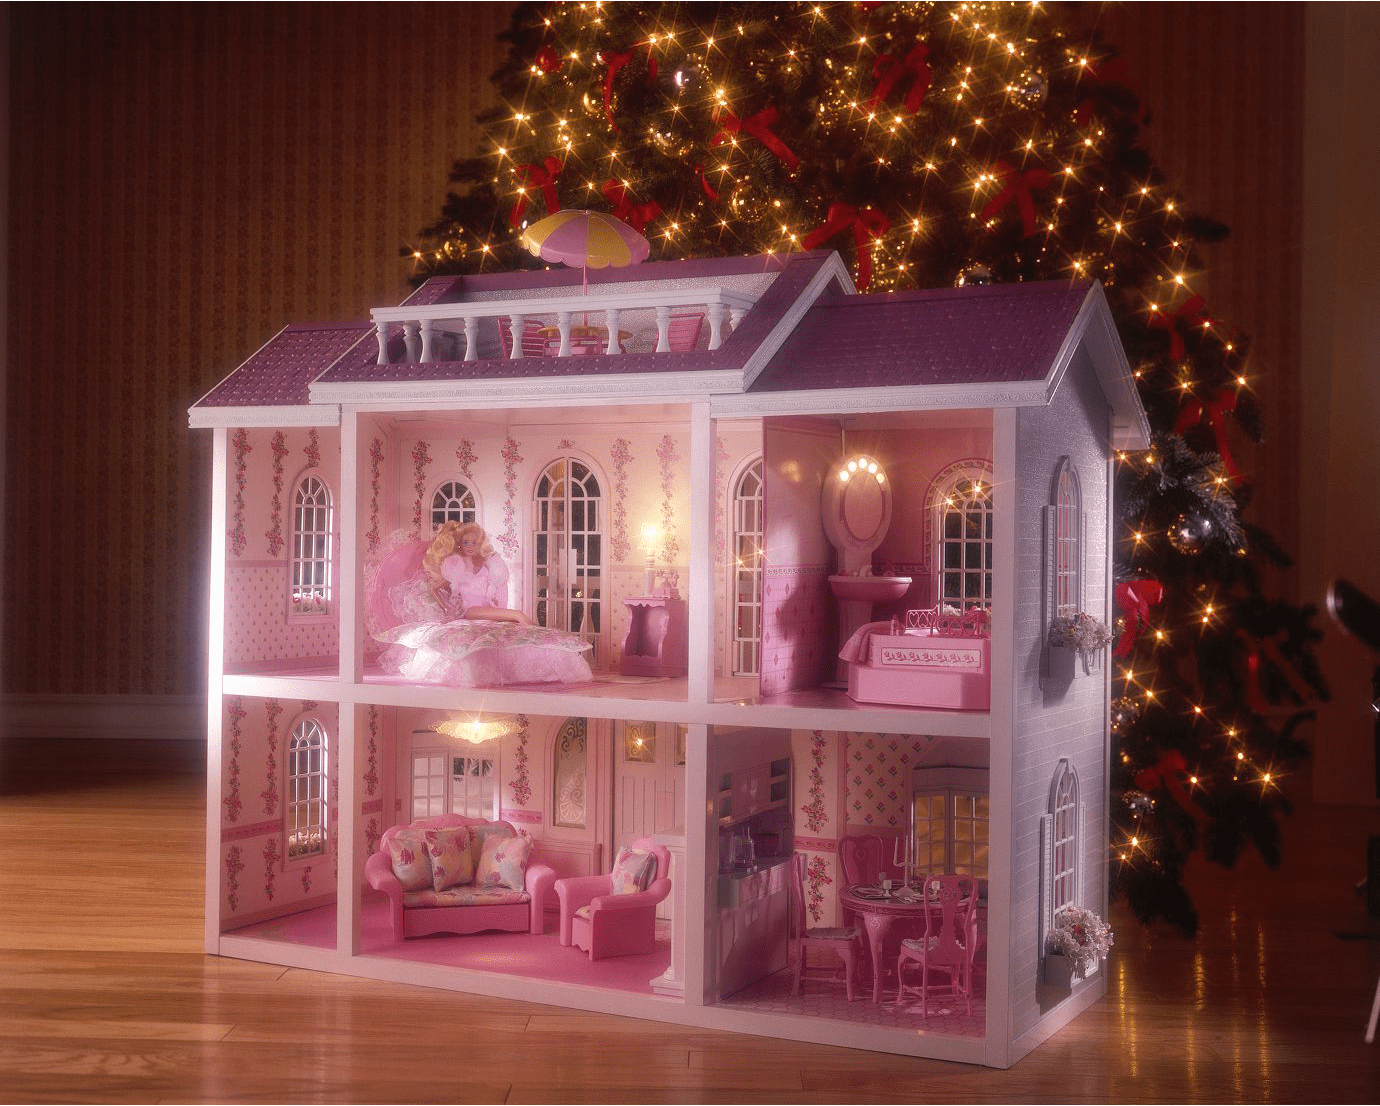 Barbie's First Dream House Was a Teeny Studio Apartment Made from Cardboard